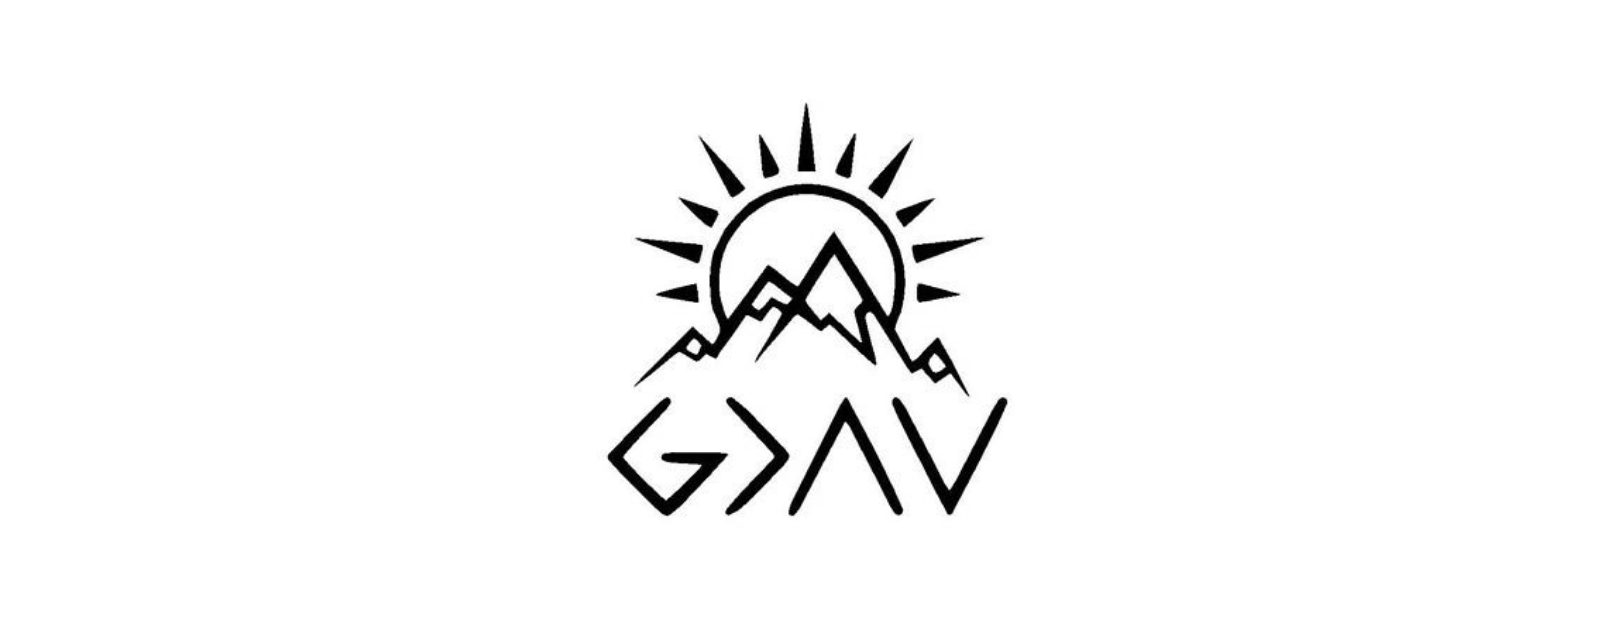 The Origin of “God is greater than the highs and lows”